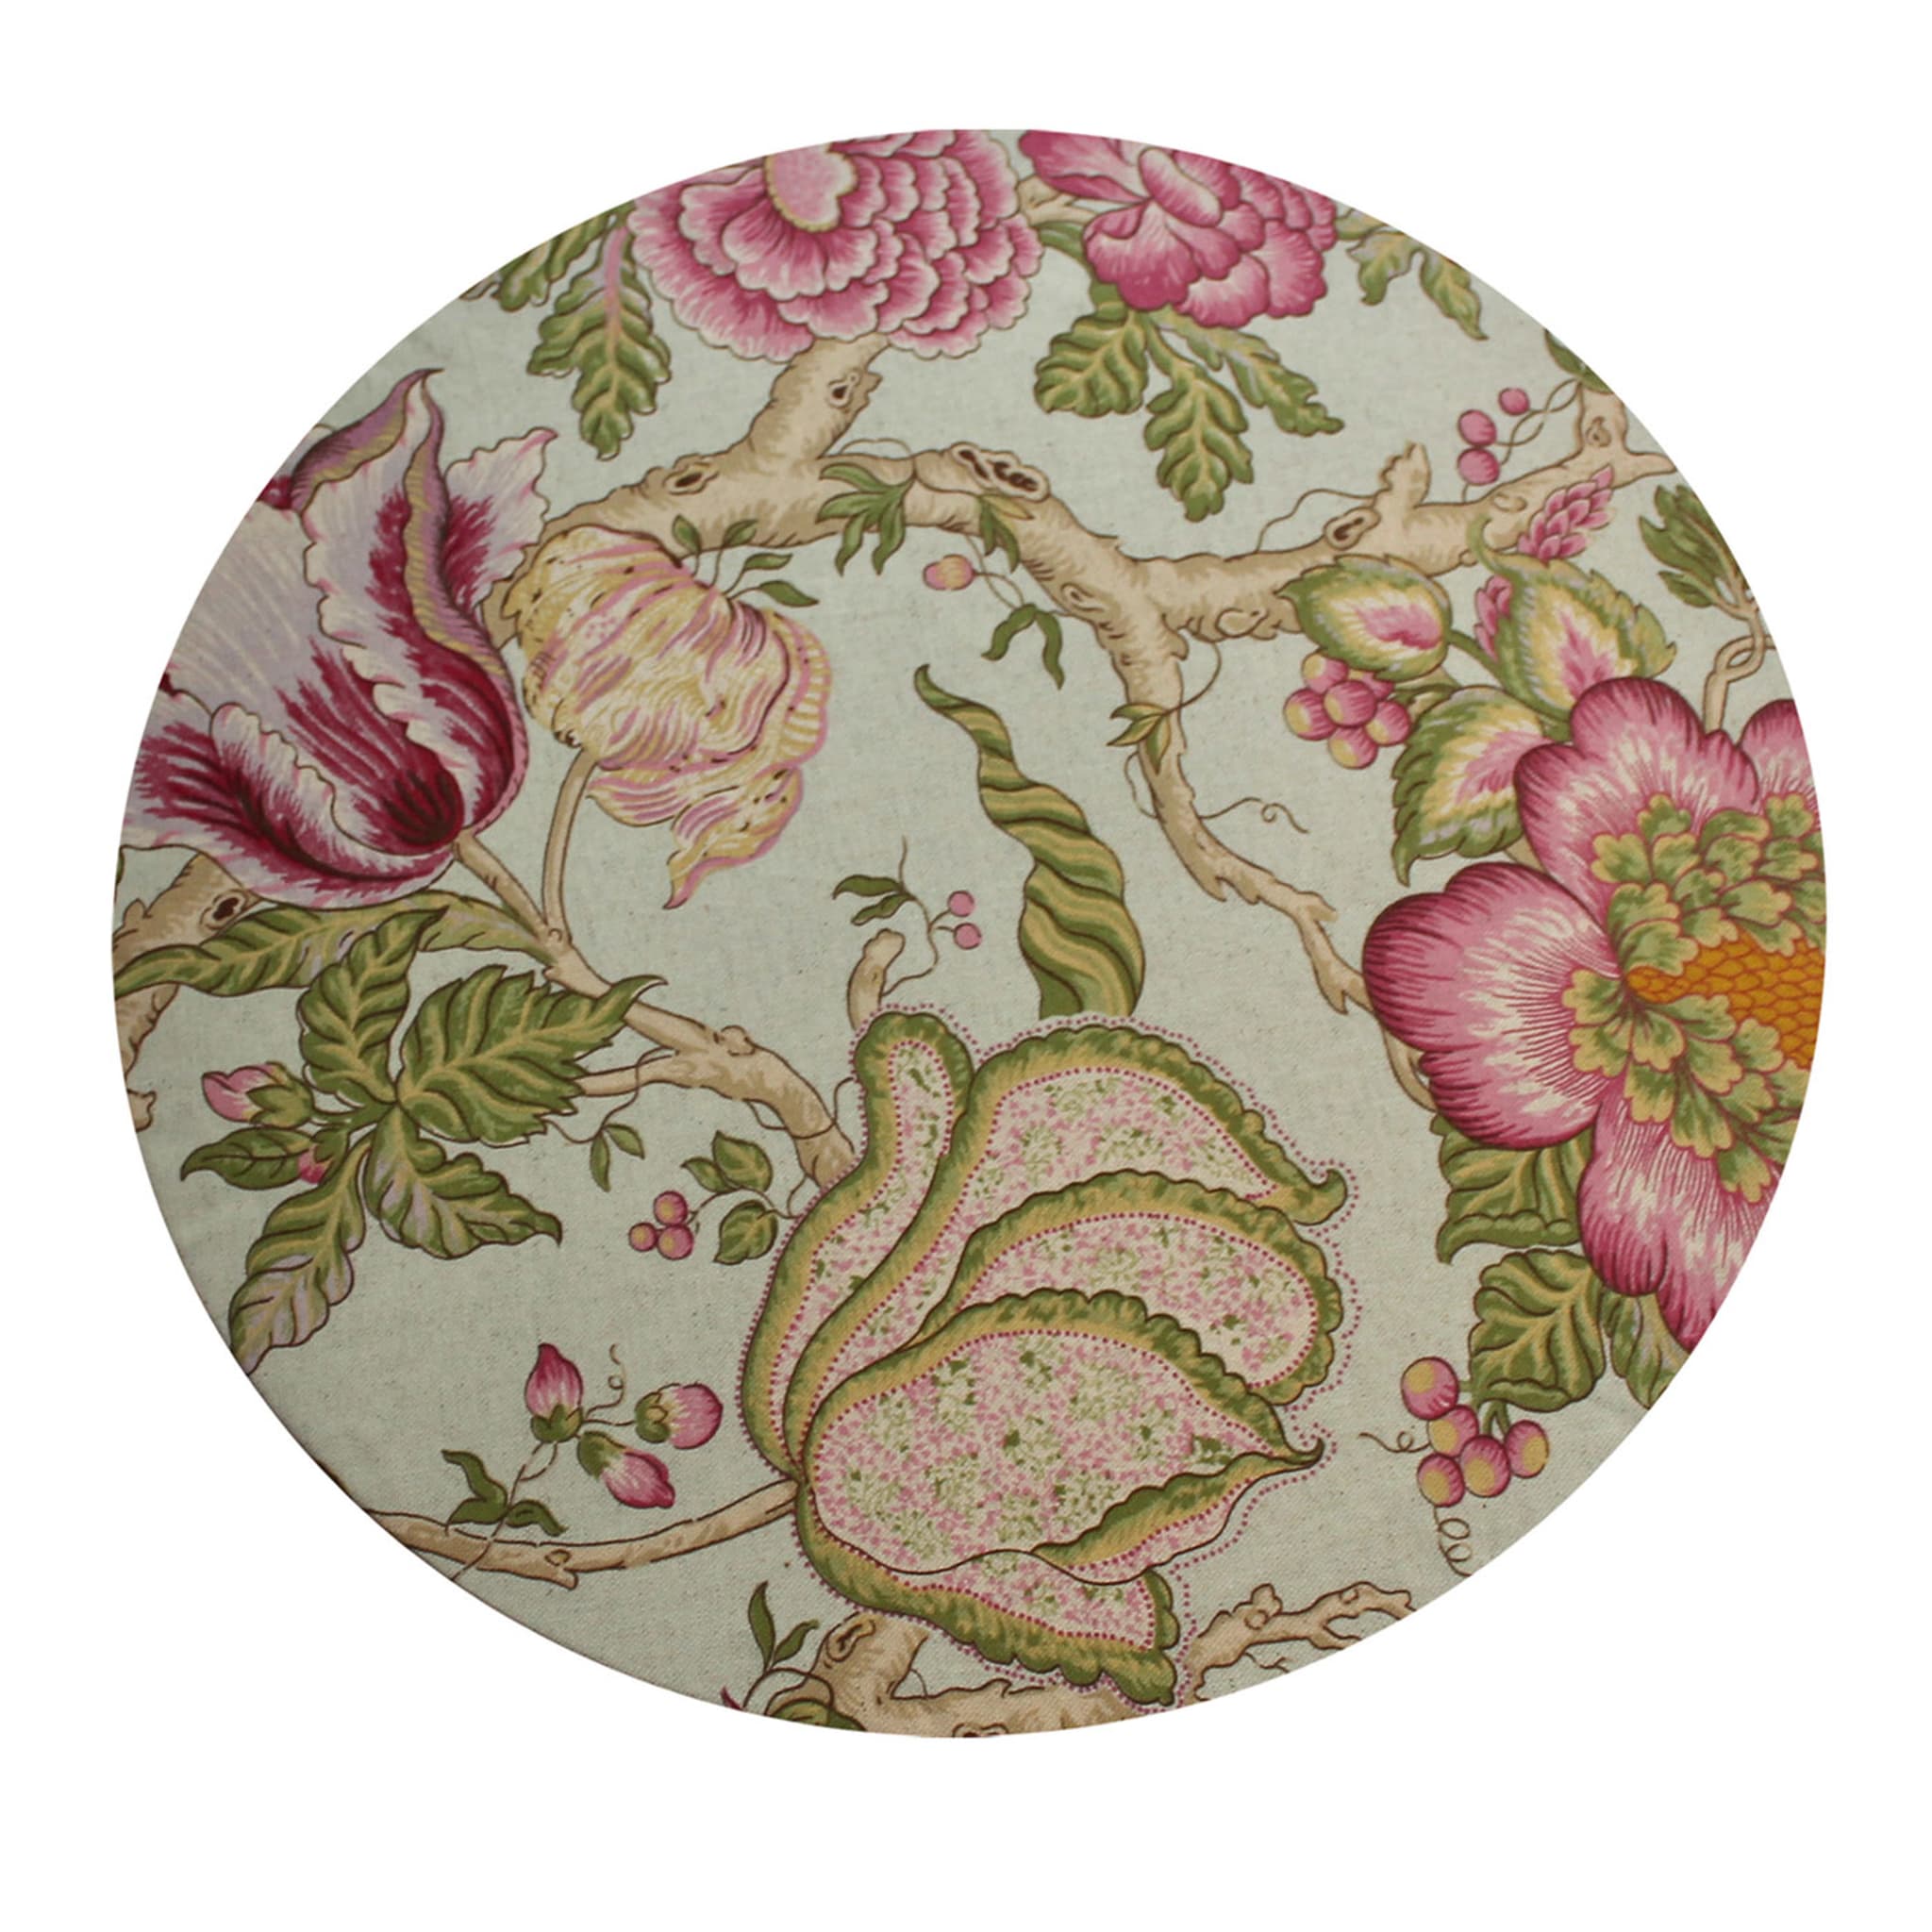 Cuffietta Small Round Floral Placemat - Main view